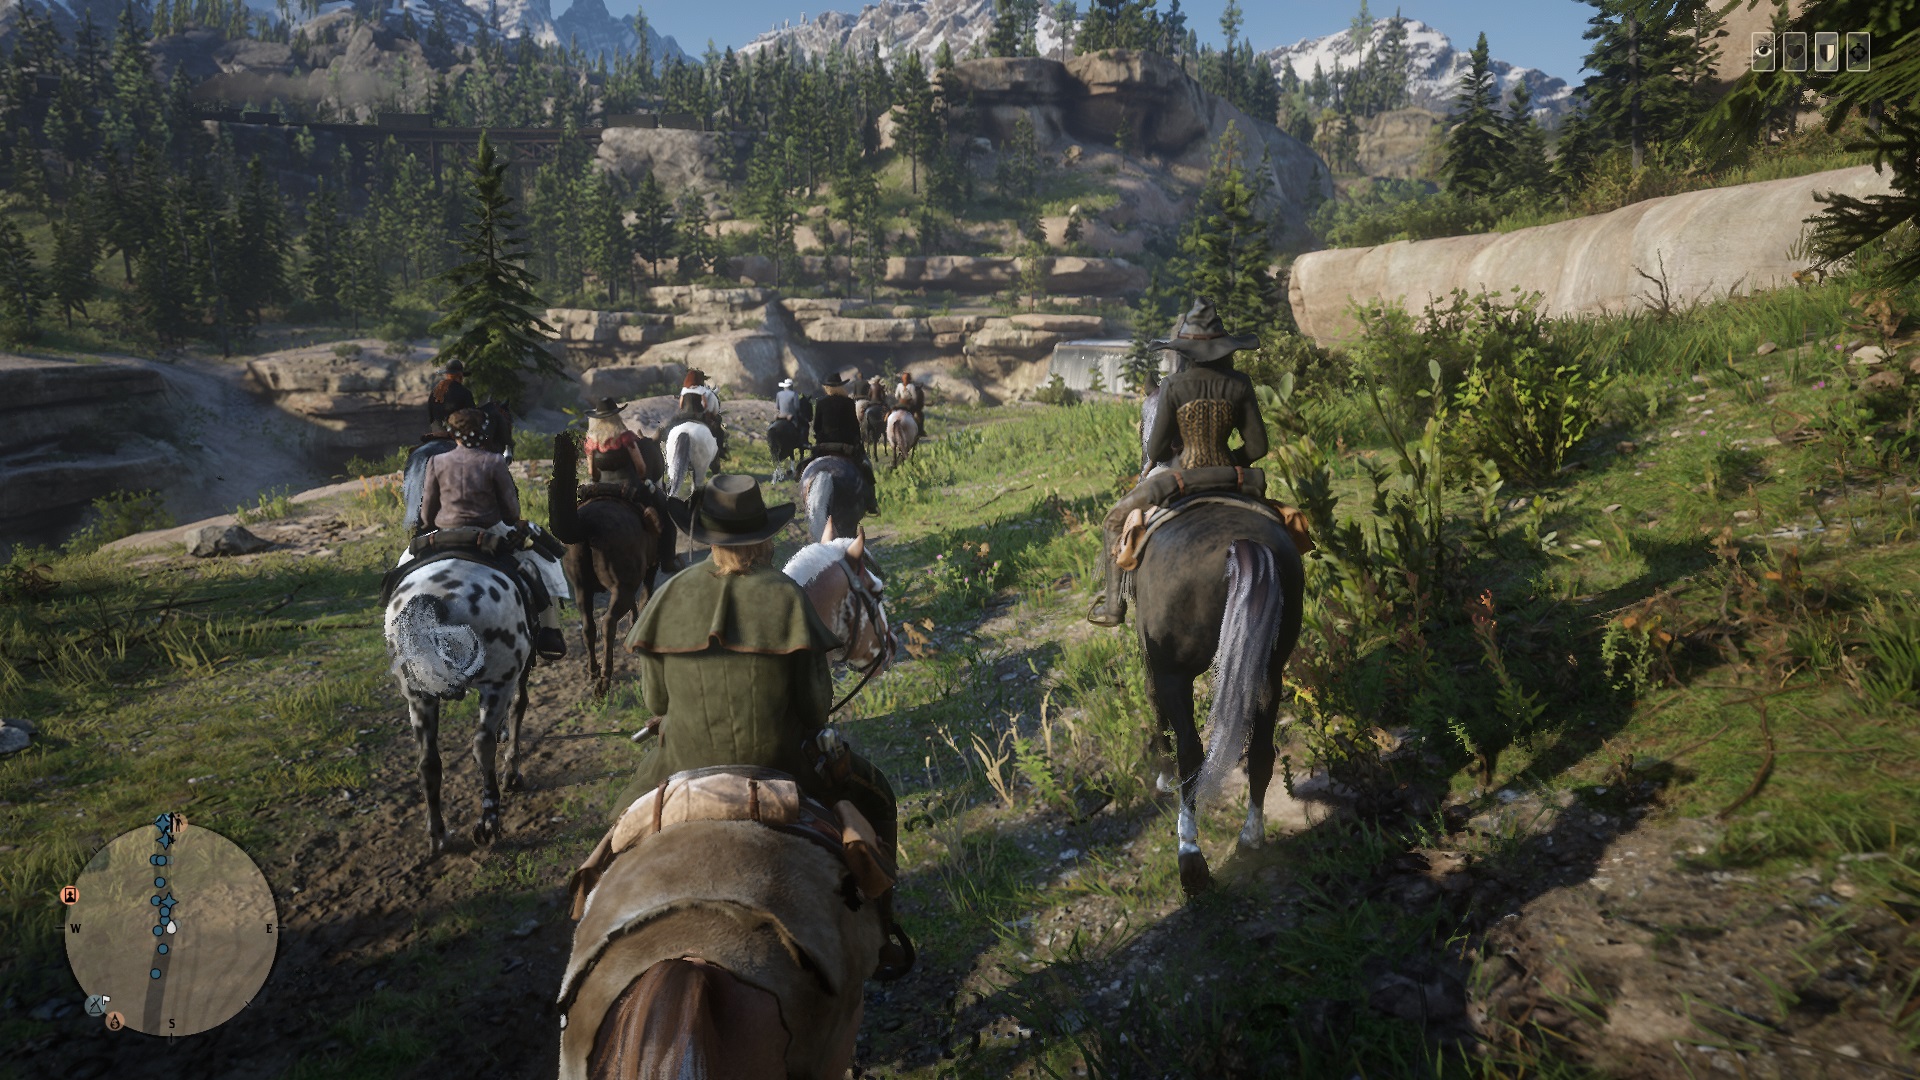 Red Dead Online - Several players ride slowly together along a dirt path through a grassy area.